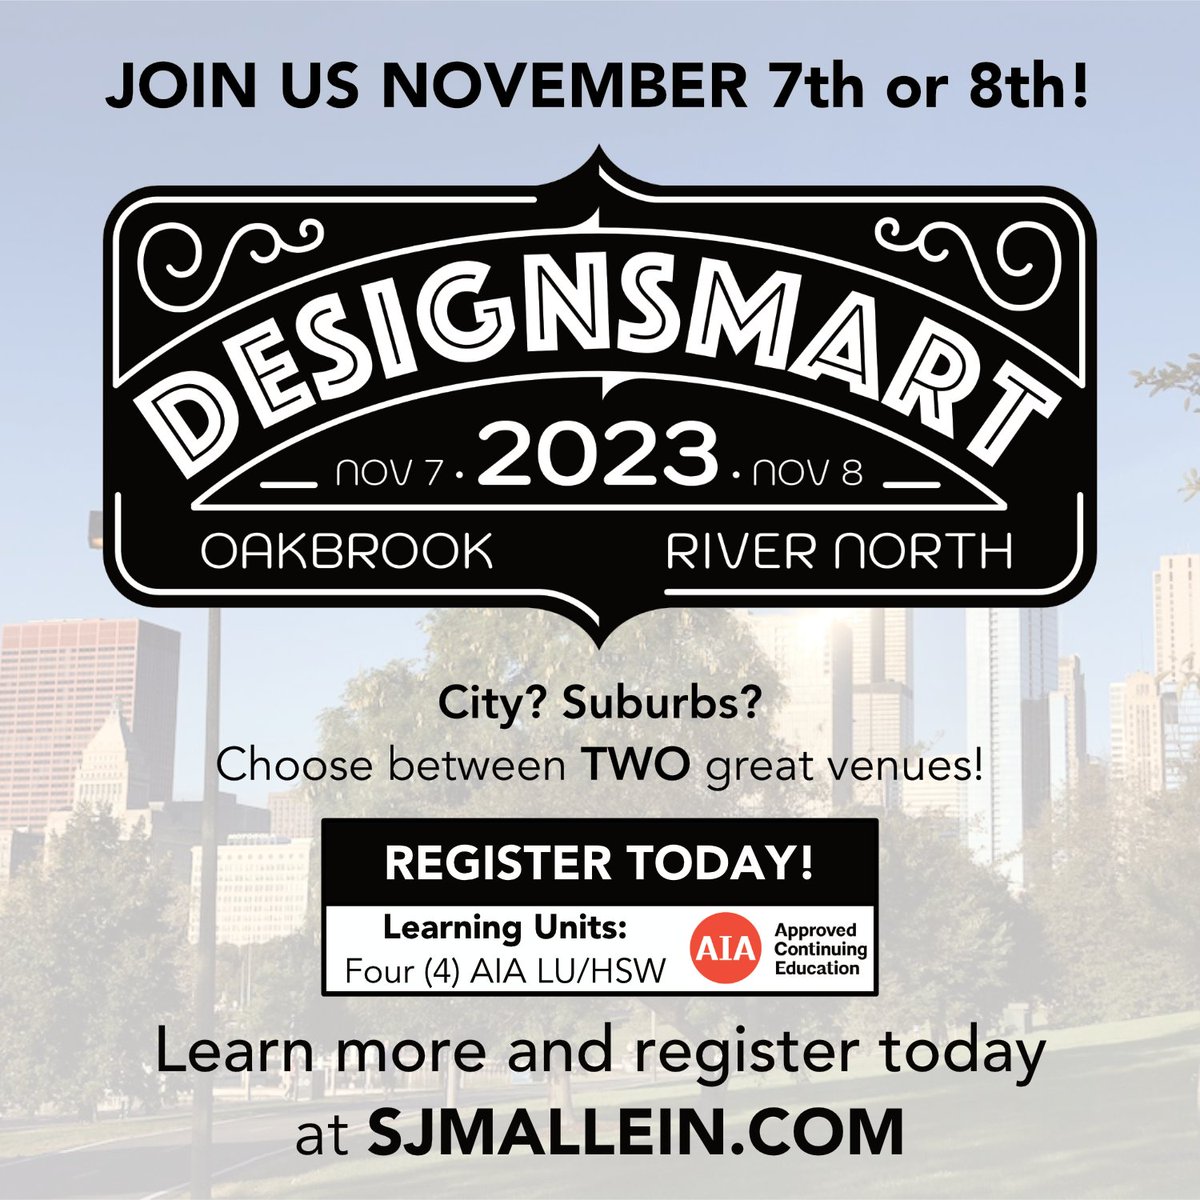 Registration is now open for #DesignSmart 2023! Click here to check out the great lineup of CEU programs and register today: bit.ly/sjmads2023